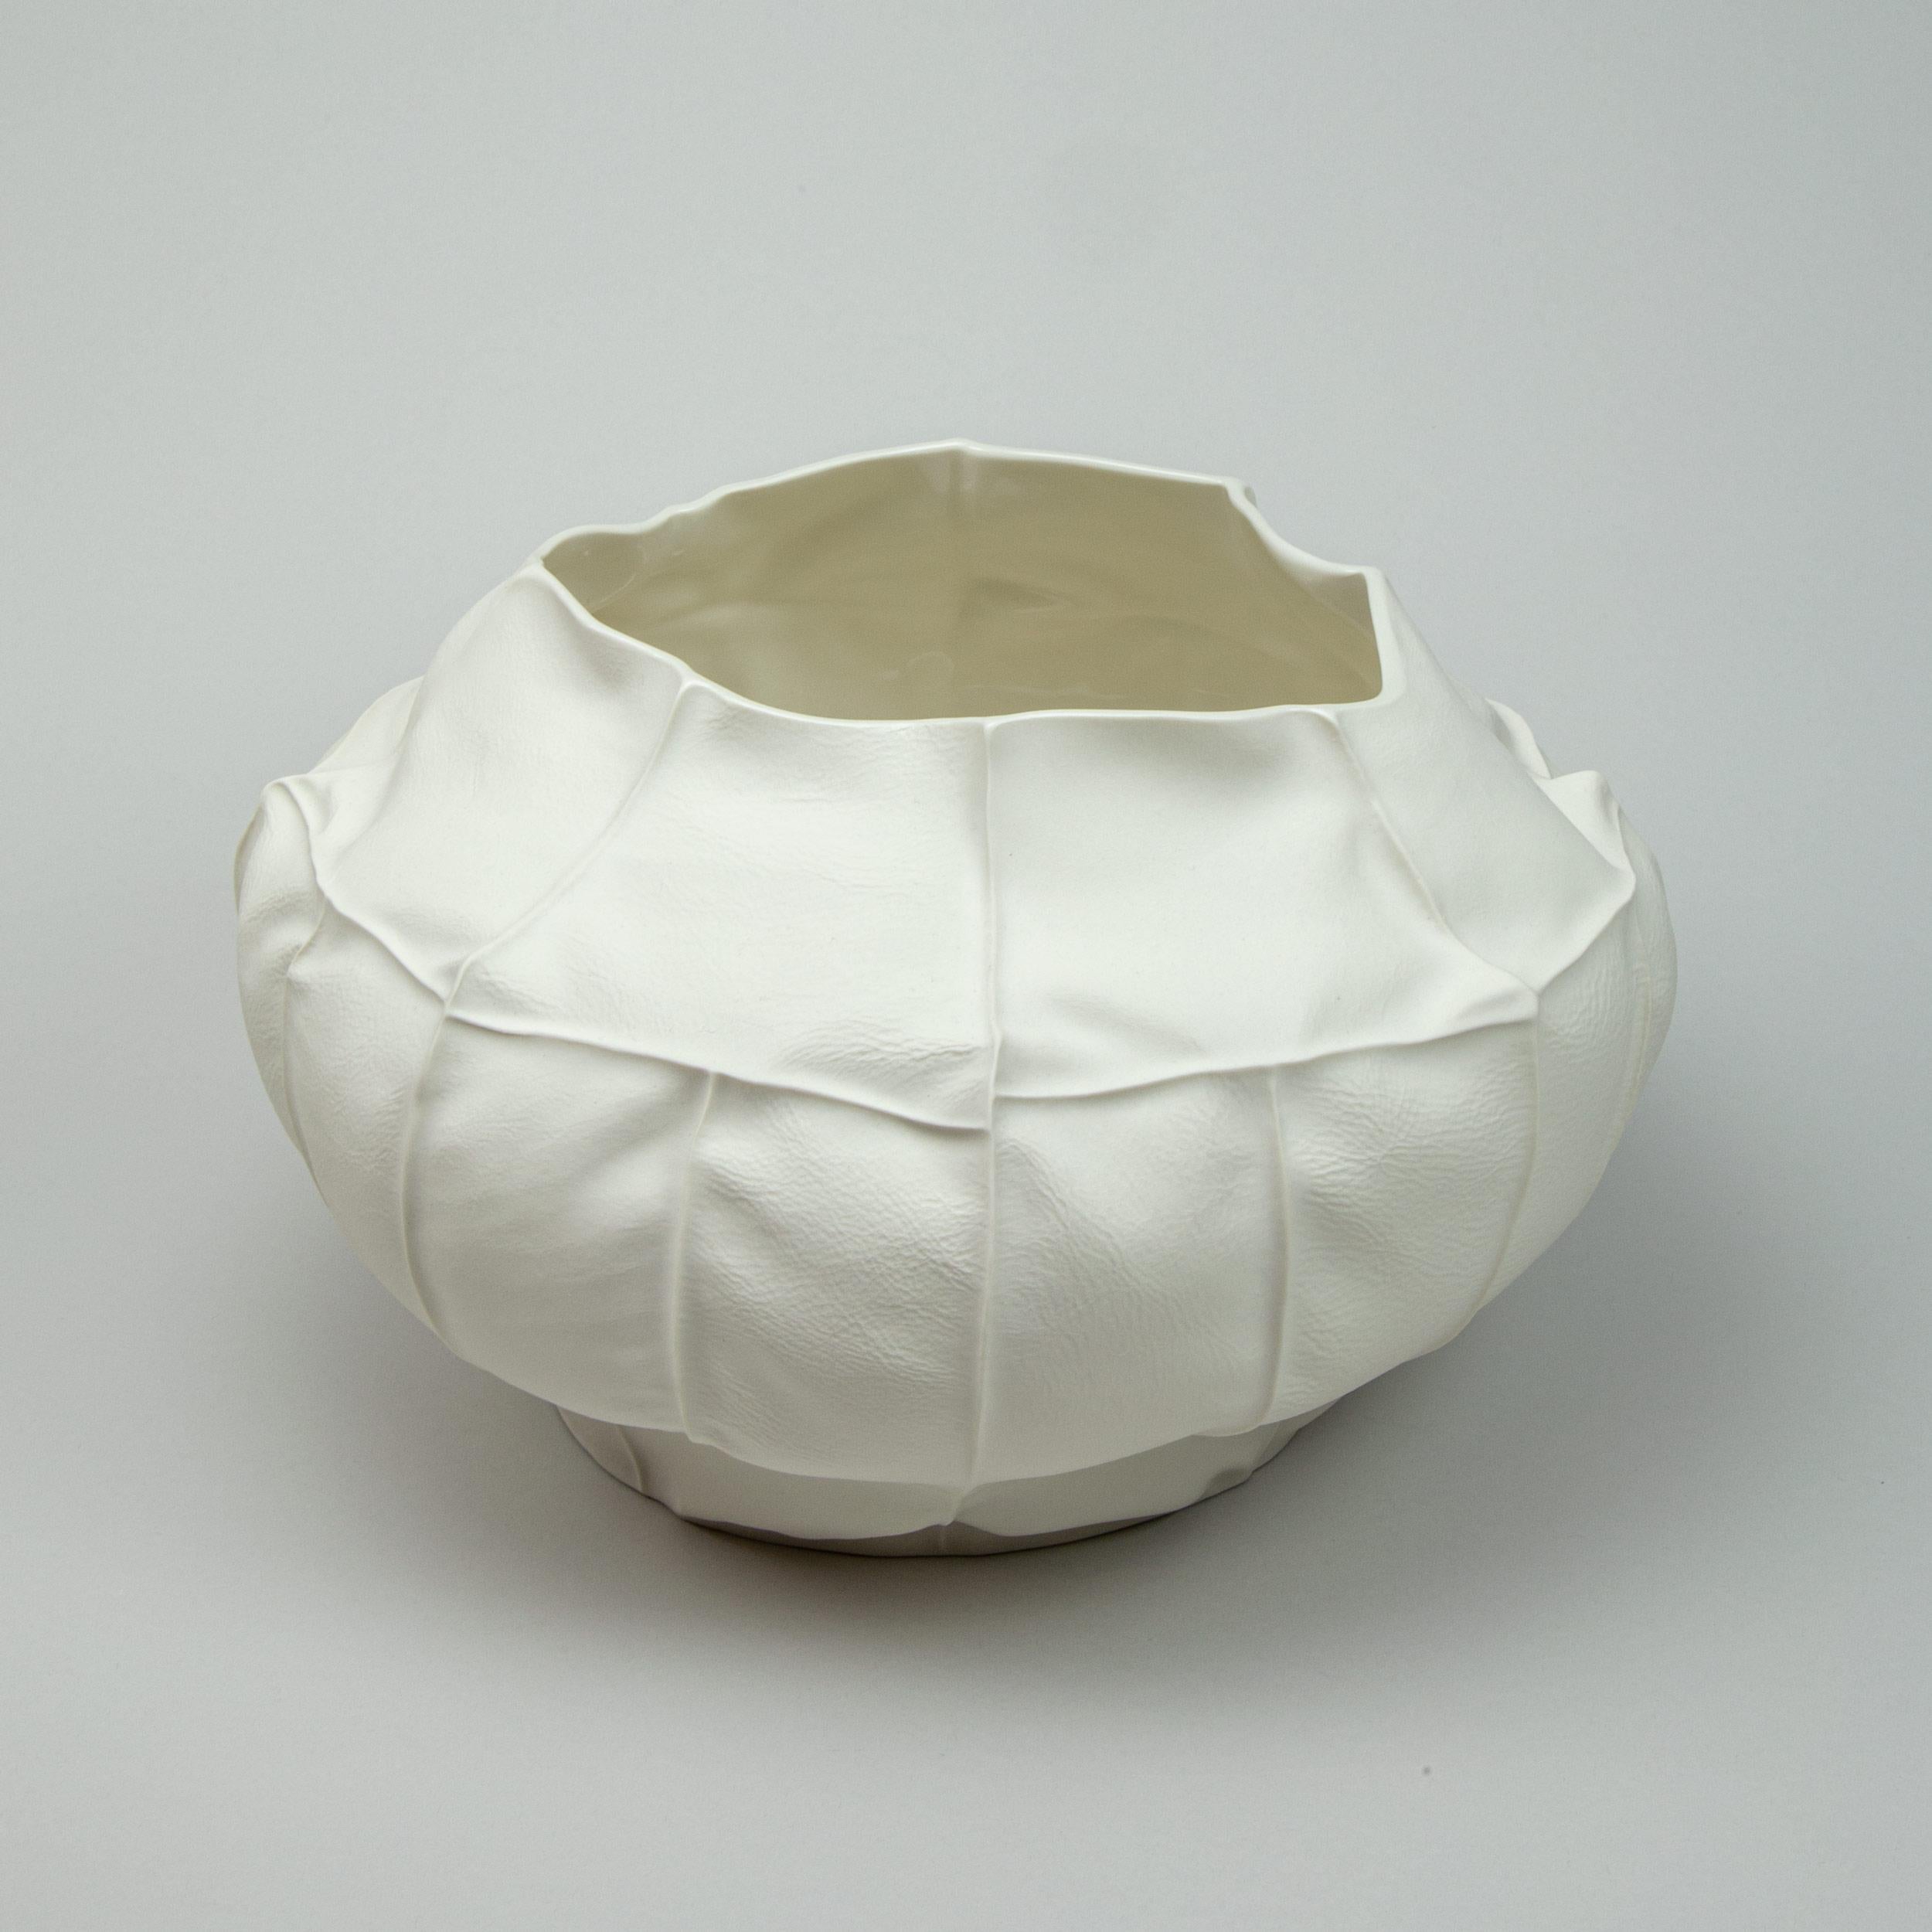 A large porcelain vessel with leather textured exterior surface and clear glazed interior. As a result of the production process each item is one-of-a-kind. 

A multitude of small leather panels are sewn together to create the leather mold for the